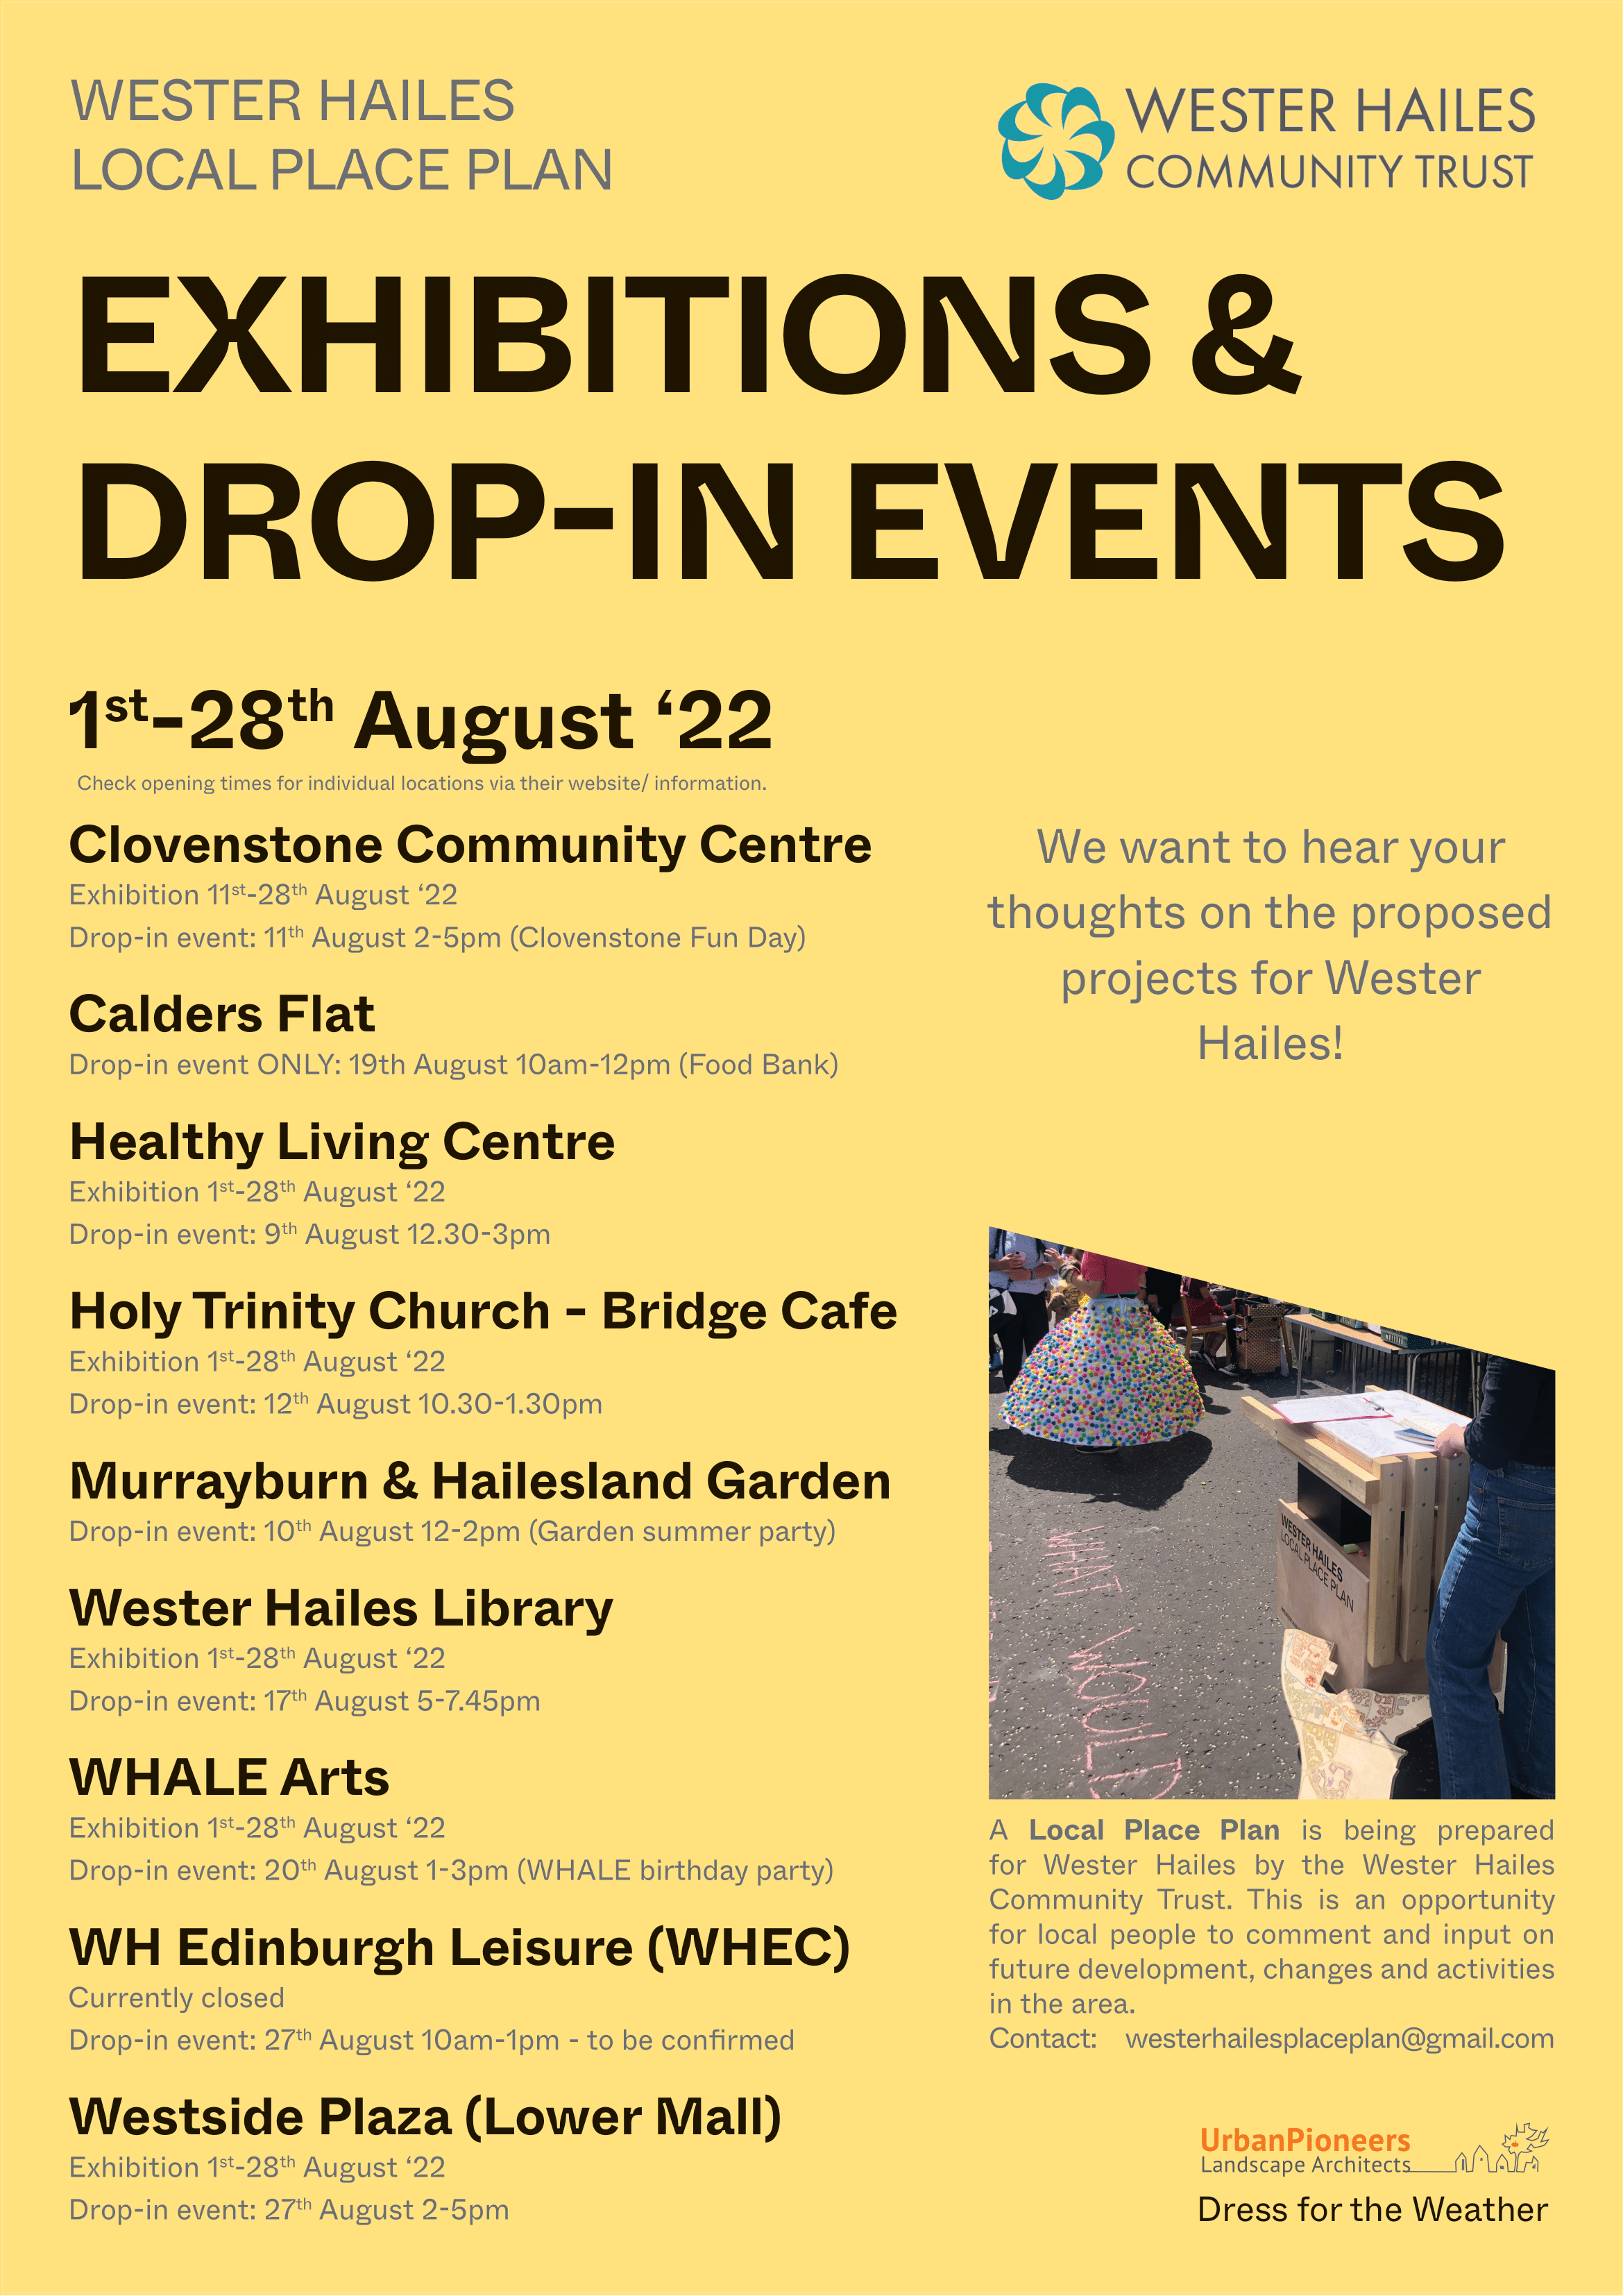 Local Place Plan Exhibition and drop-in events